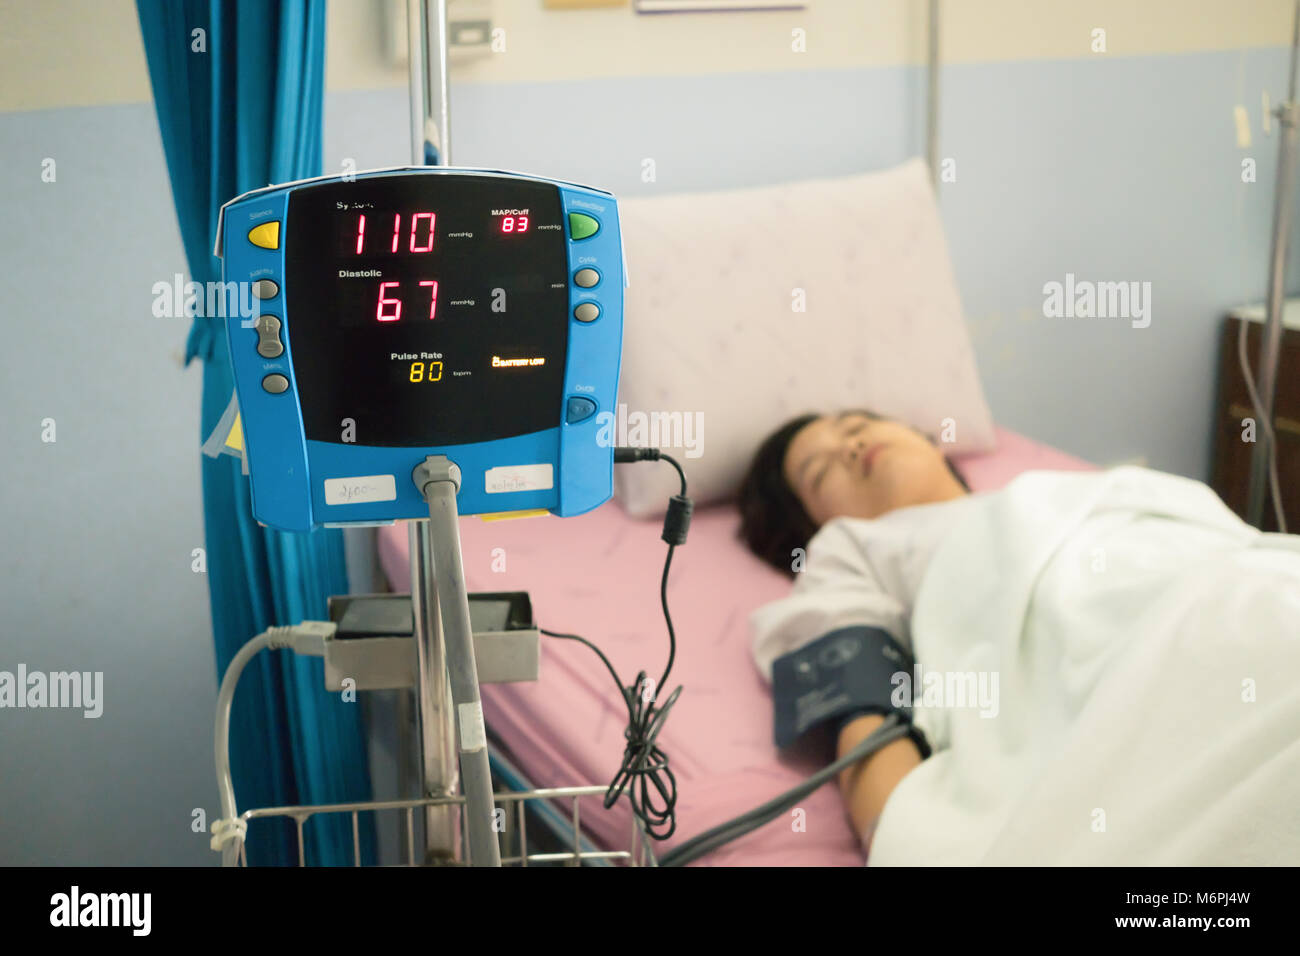 Focus on blood pressure monitor with female patient on bed inside hospital.  Medical concept Stock Photo - Alamy